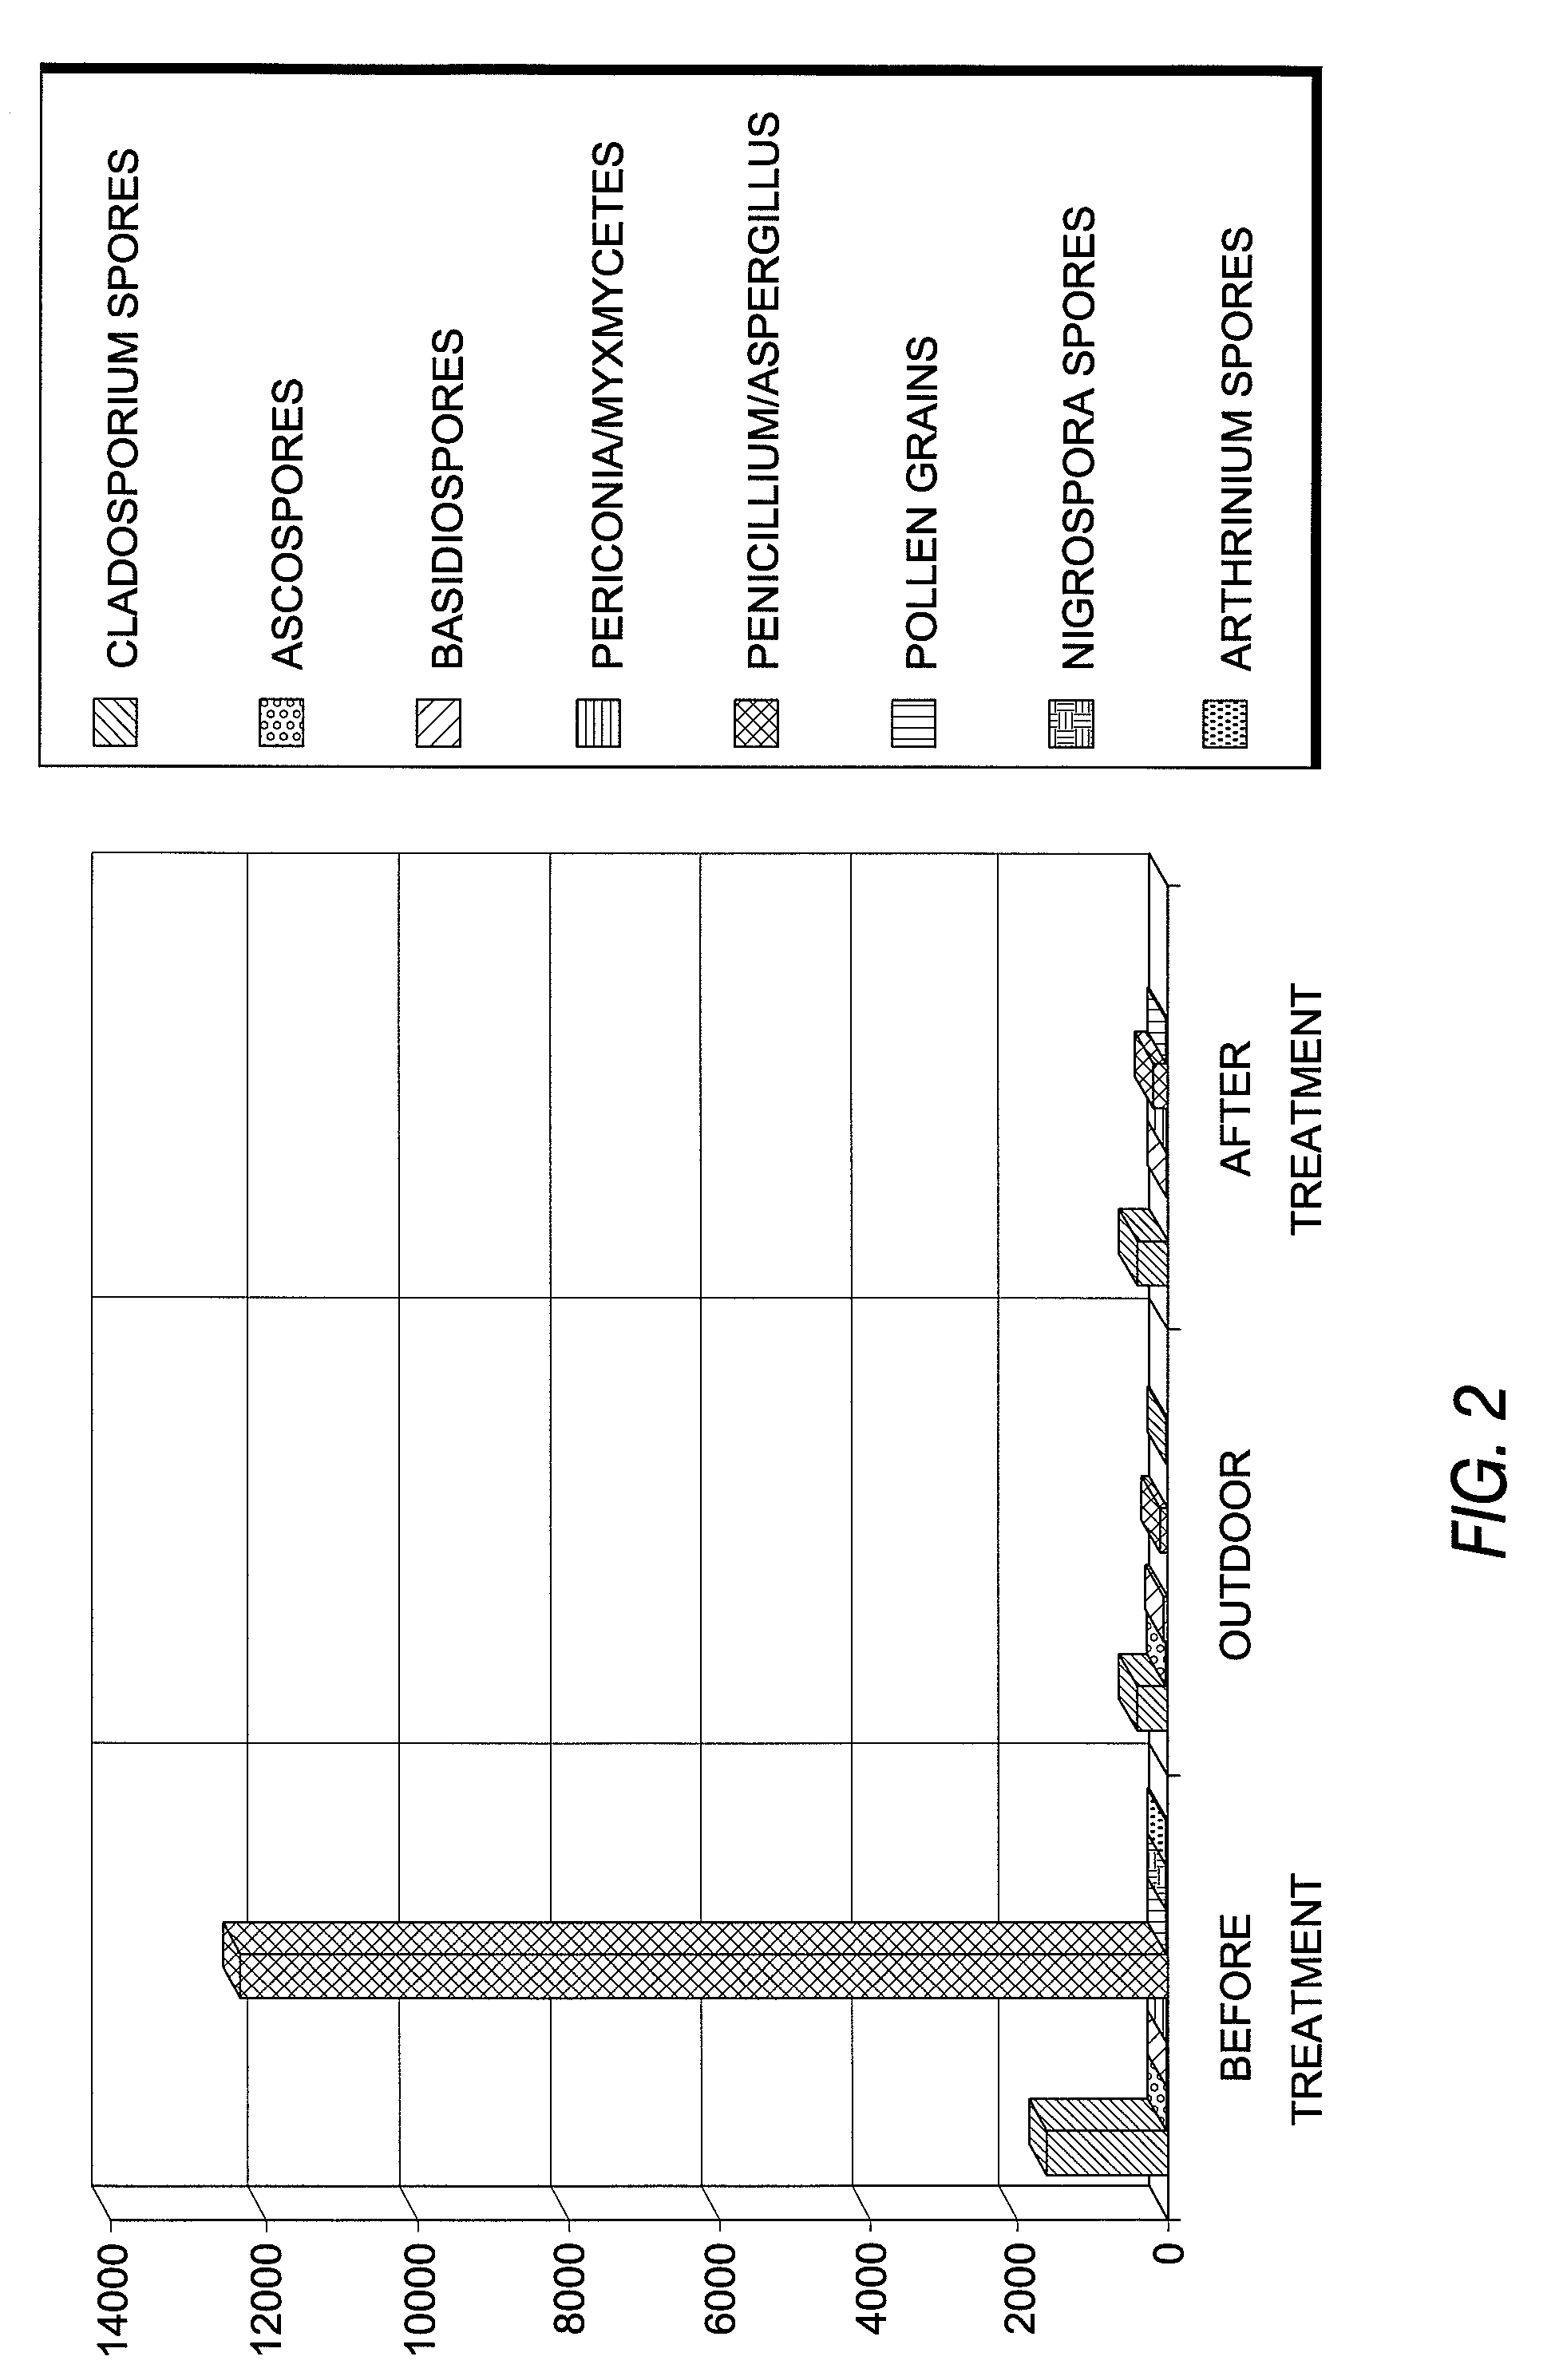 Method for abatement of allergens, pathogens and volatile organic compounds